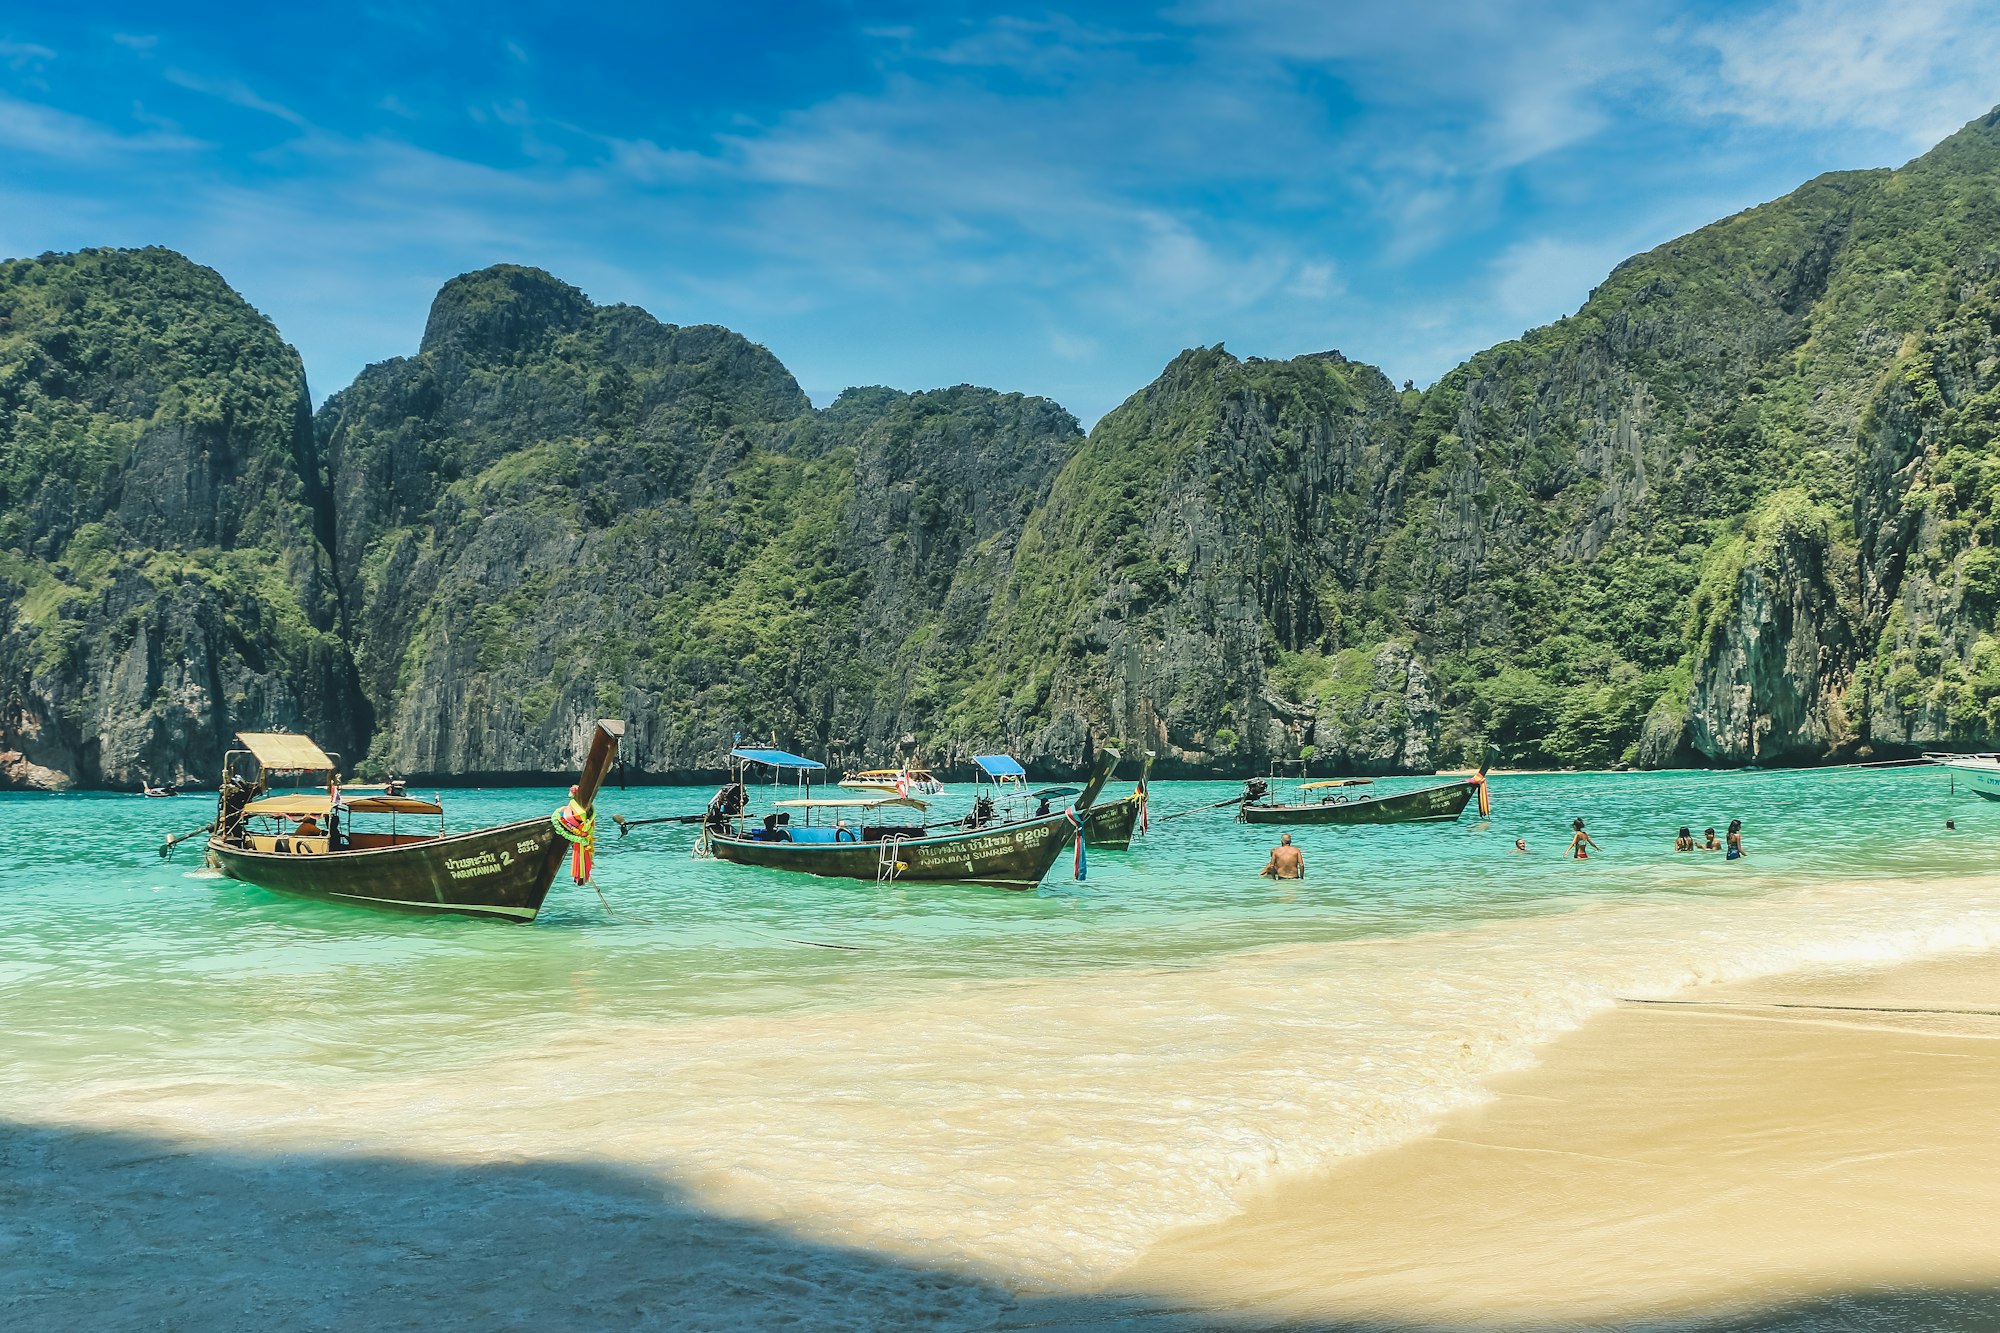 Boats in a bay in Thailand